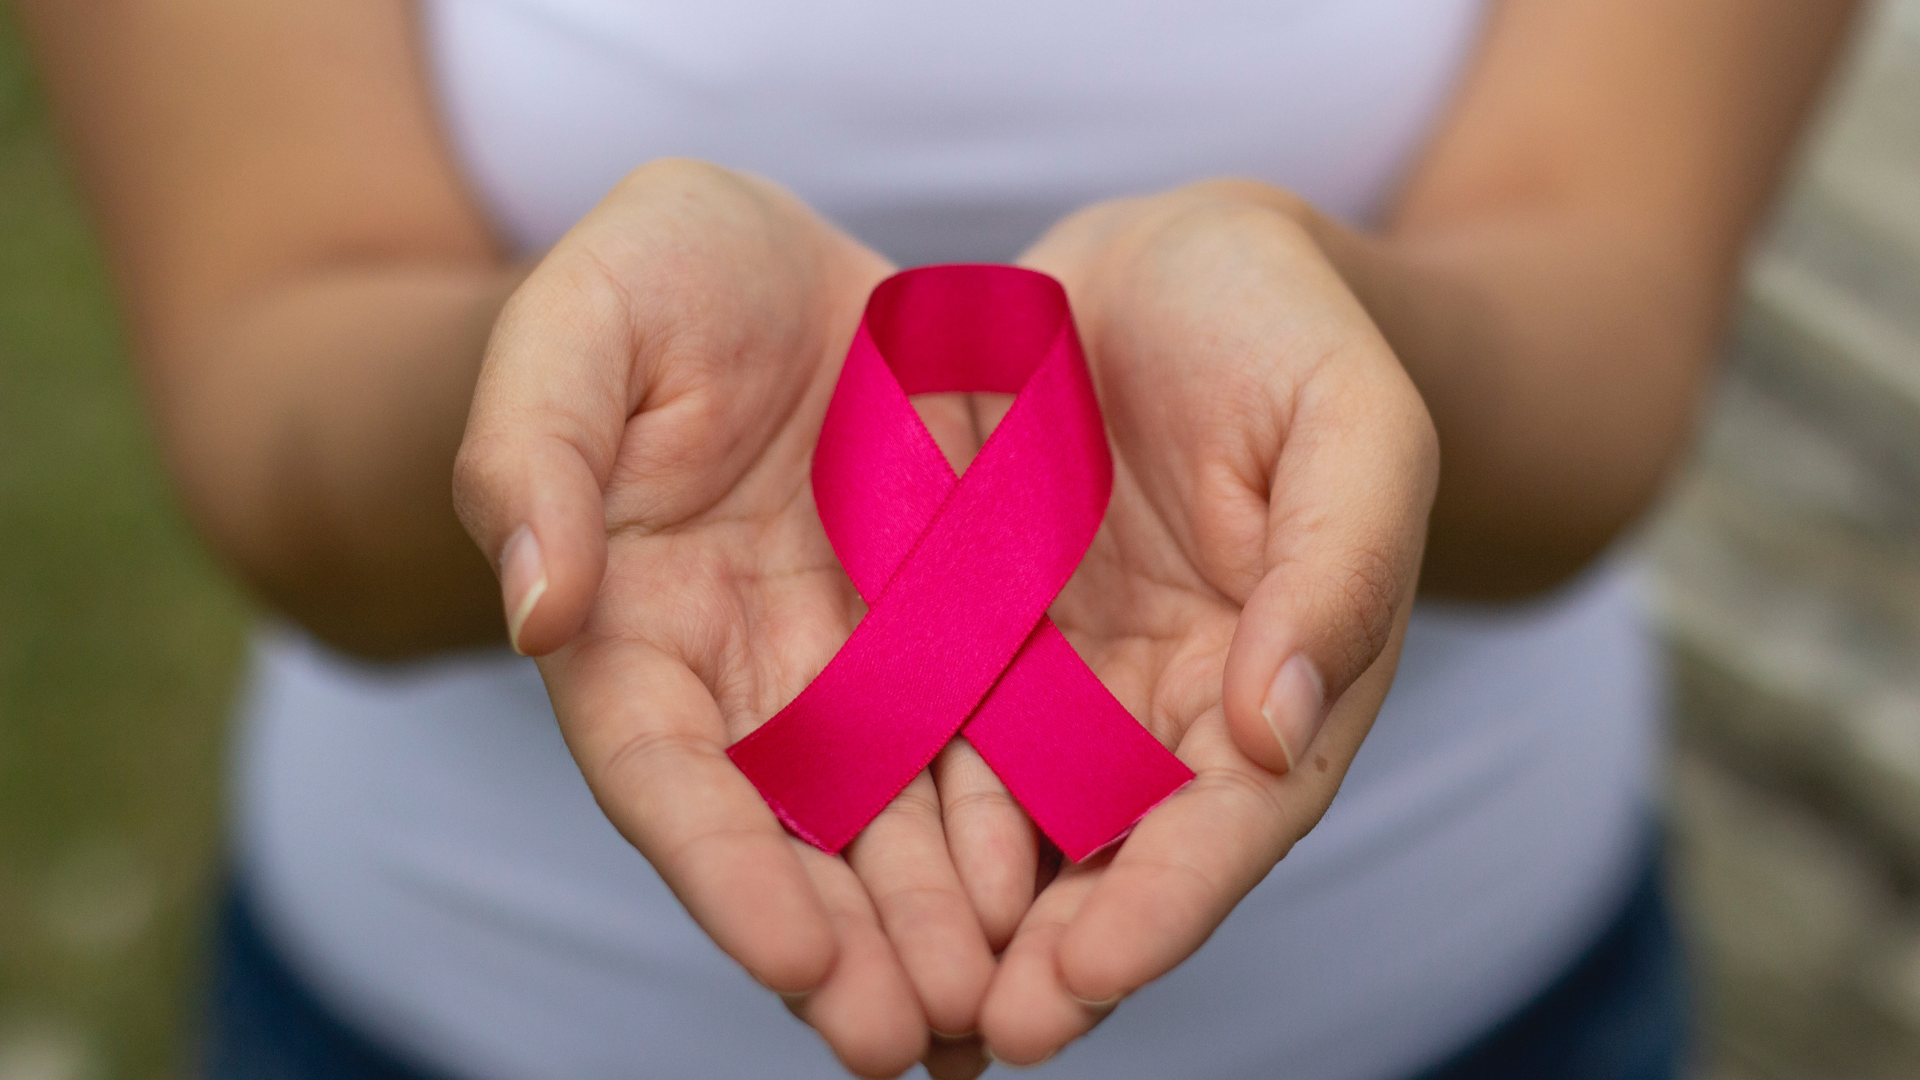 4 ways to reduce breast cancer risks